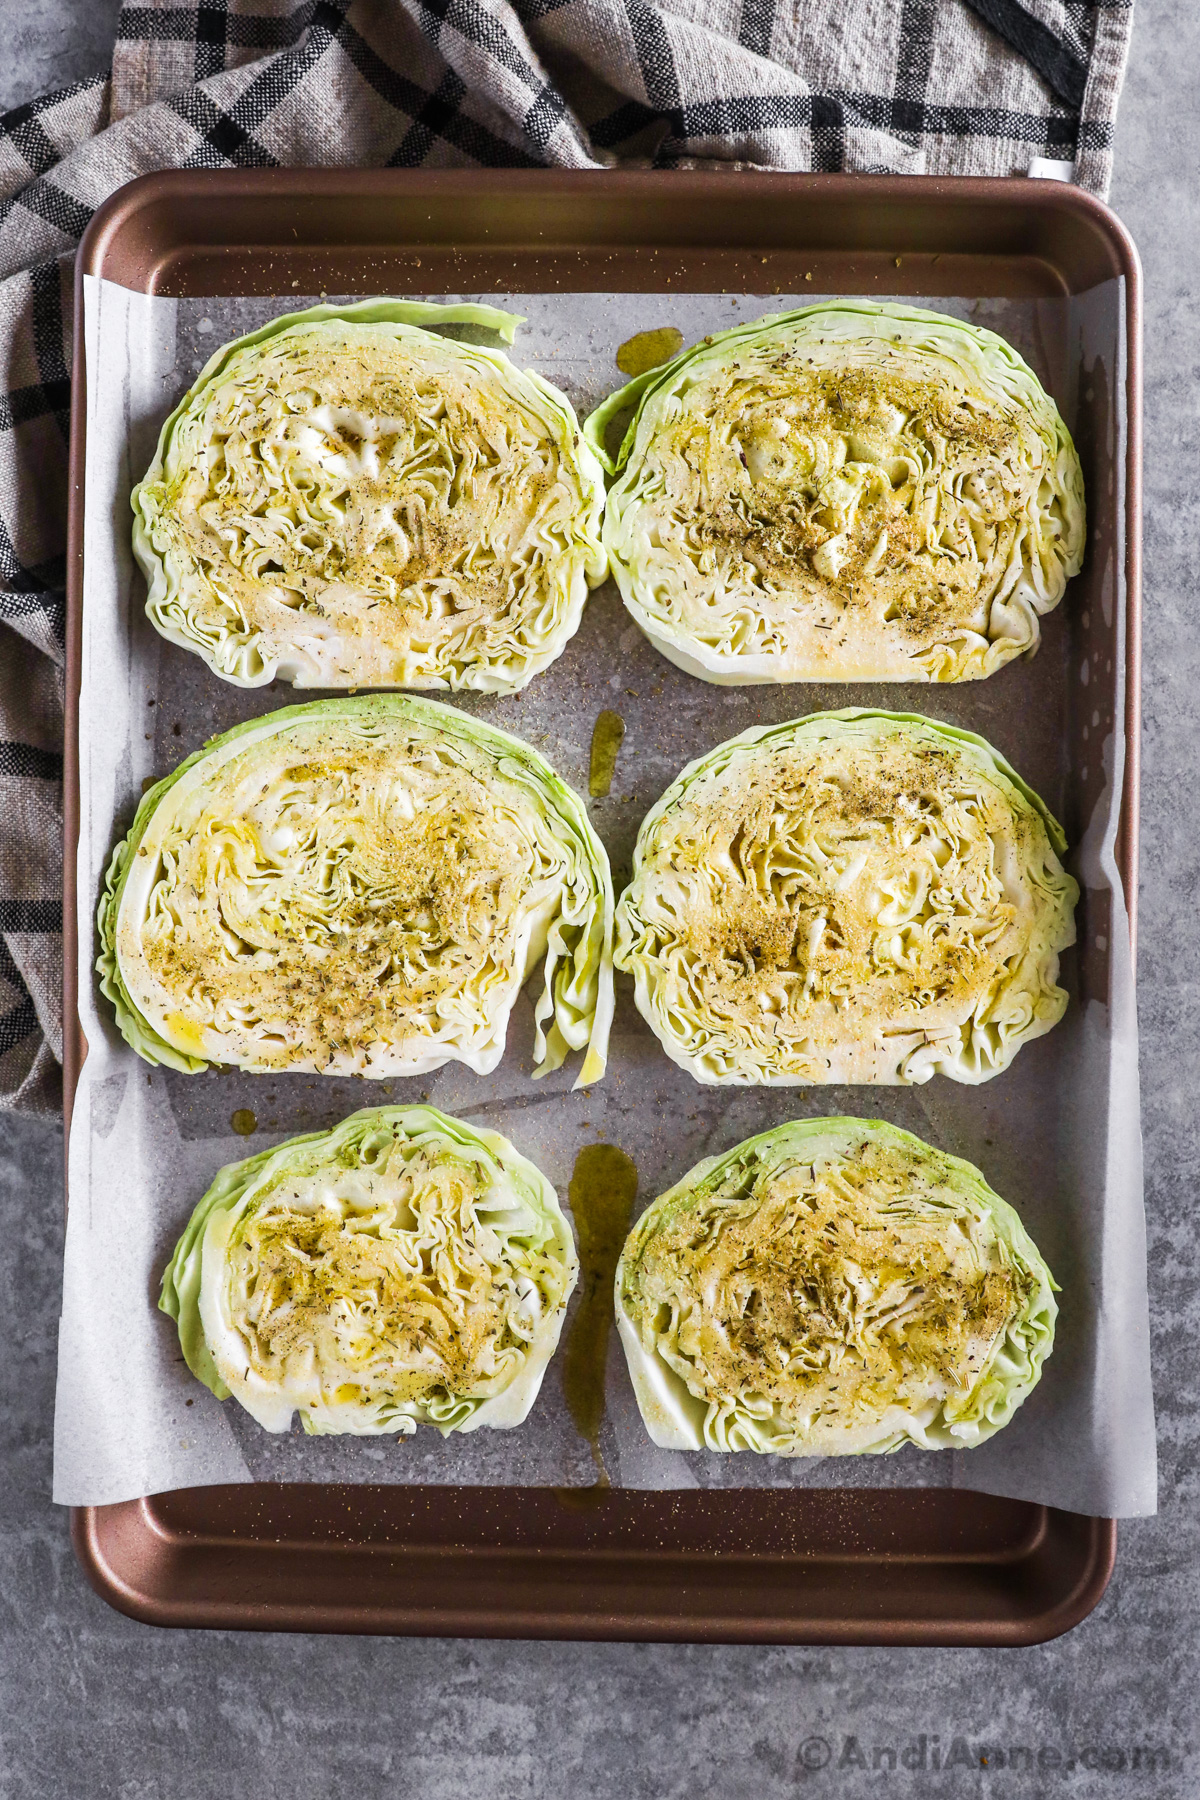 Sliced raw green cabbage on a baking sheet, sprinkled with oil and spices.